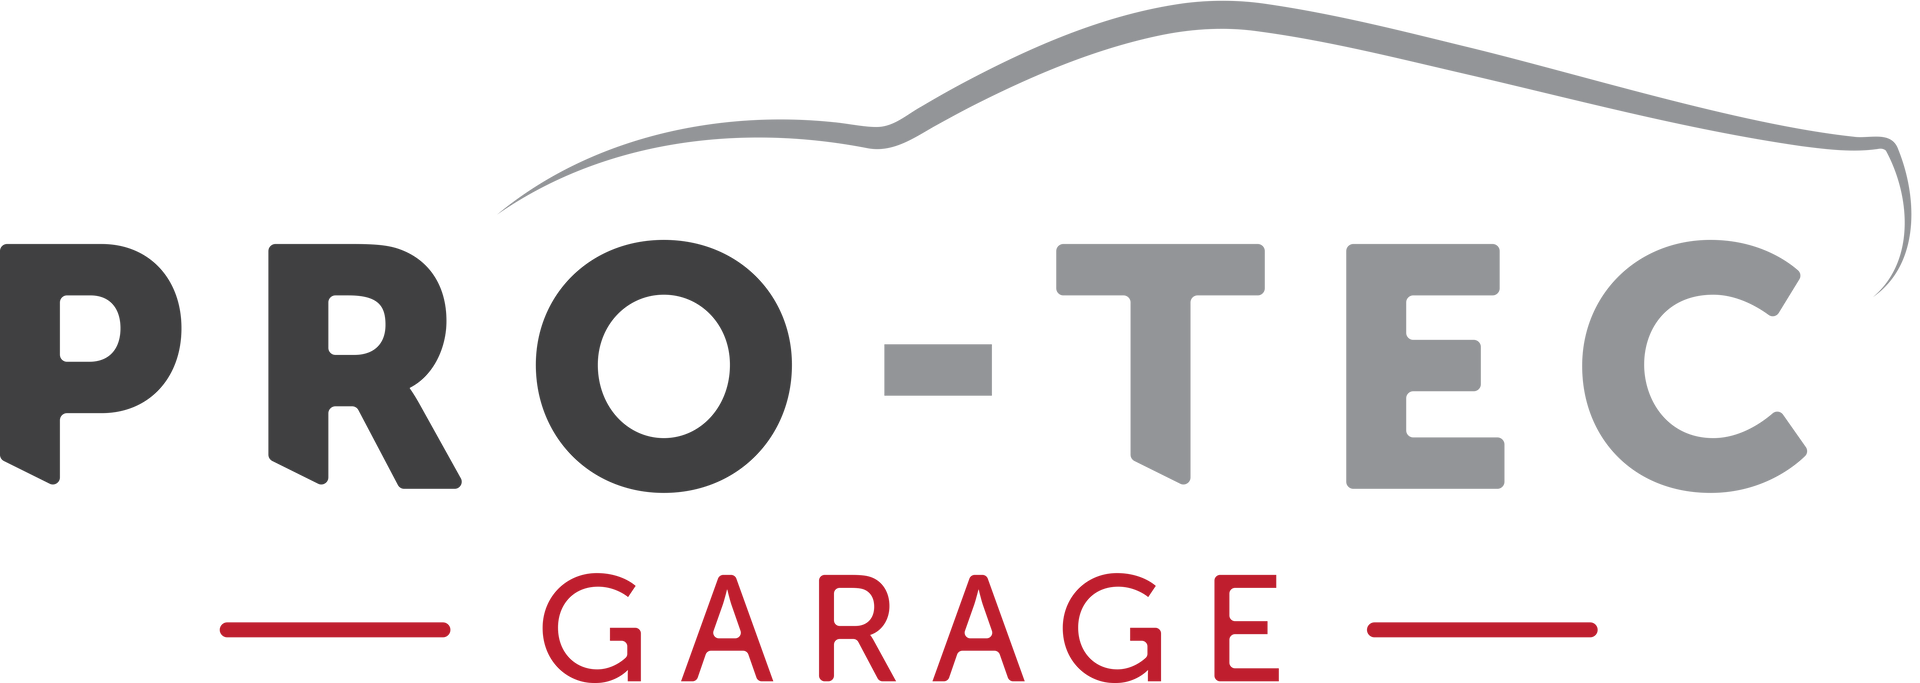 a logo for pro-tec garage with a car having a ceramic coating applied